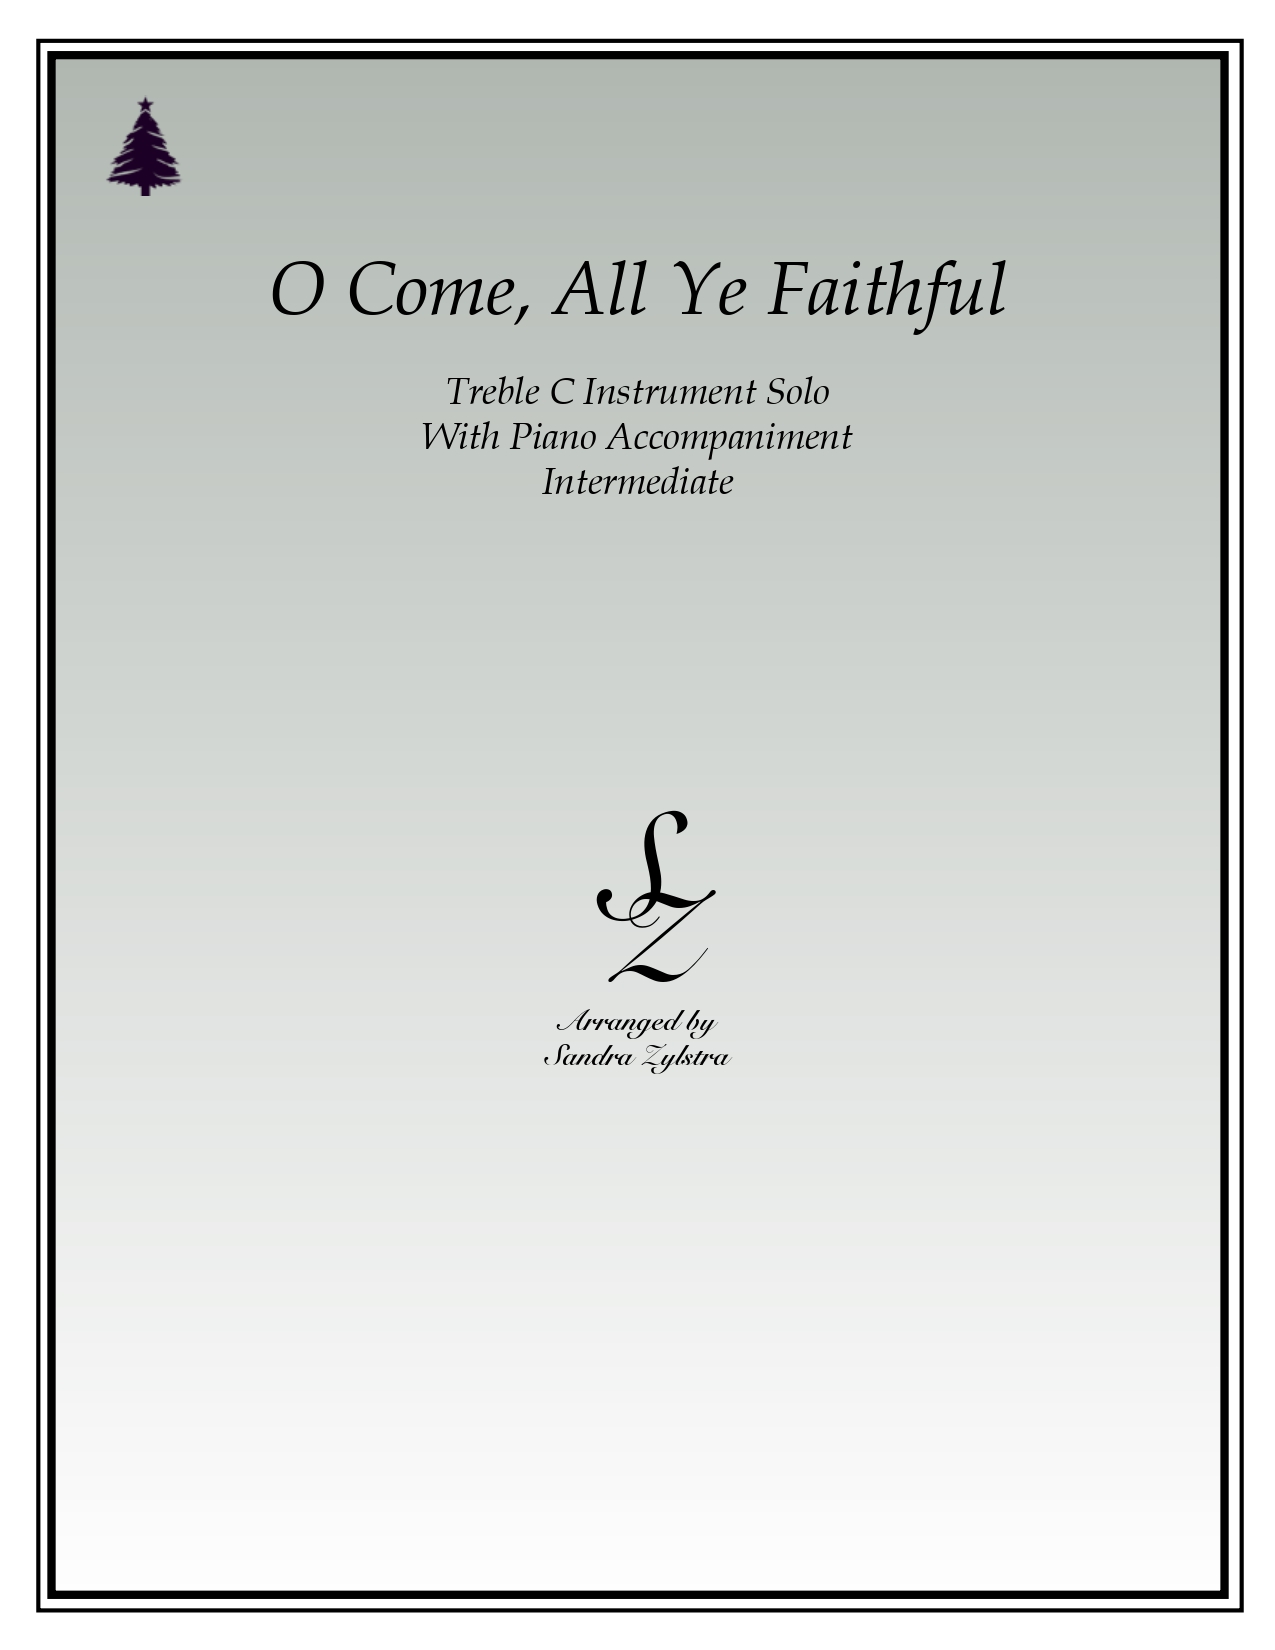 O Come All Ye Faithful treble C instrument solo part cover page 00011